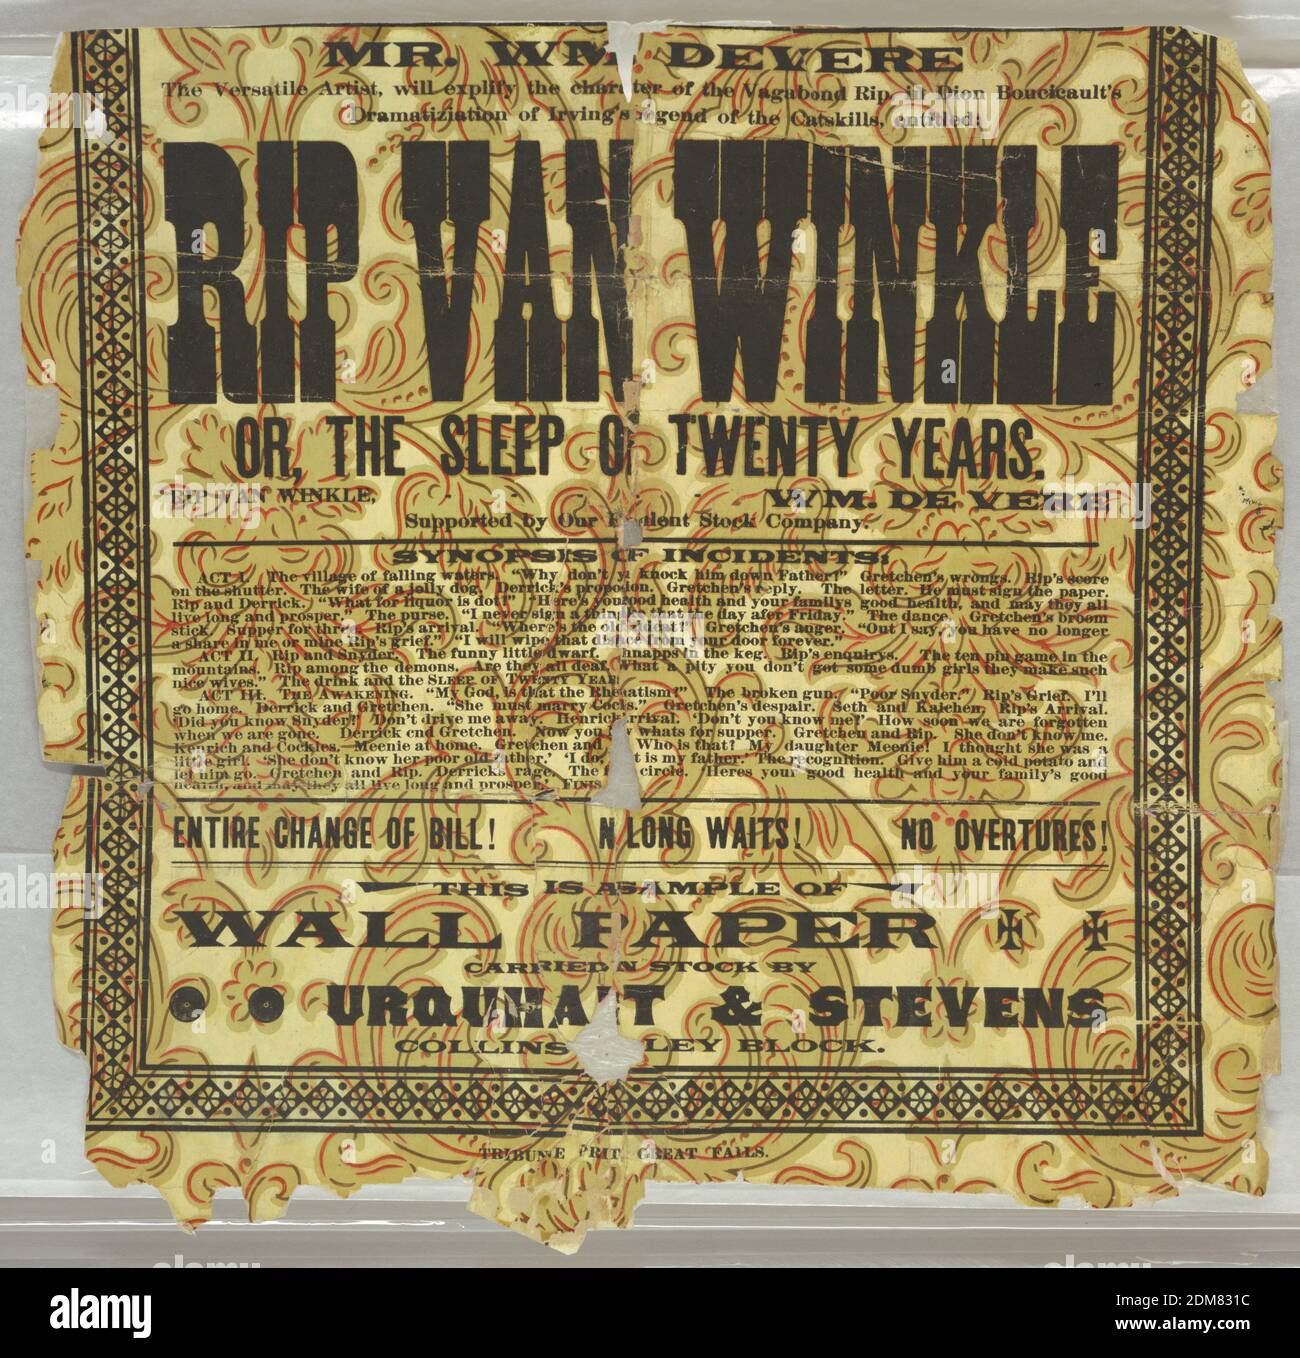 Rip Van Winkle Machine Printed Paper On A Fleur De Lys Rococo Or Aesthetic Style Wallpaper Fragment Pattern By Urquhart Stevens Wallpaper Co Printed With An Advertisement For A Presentation Of Rip Van Winkle A